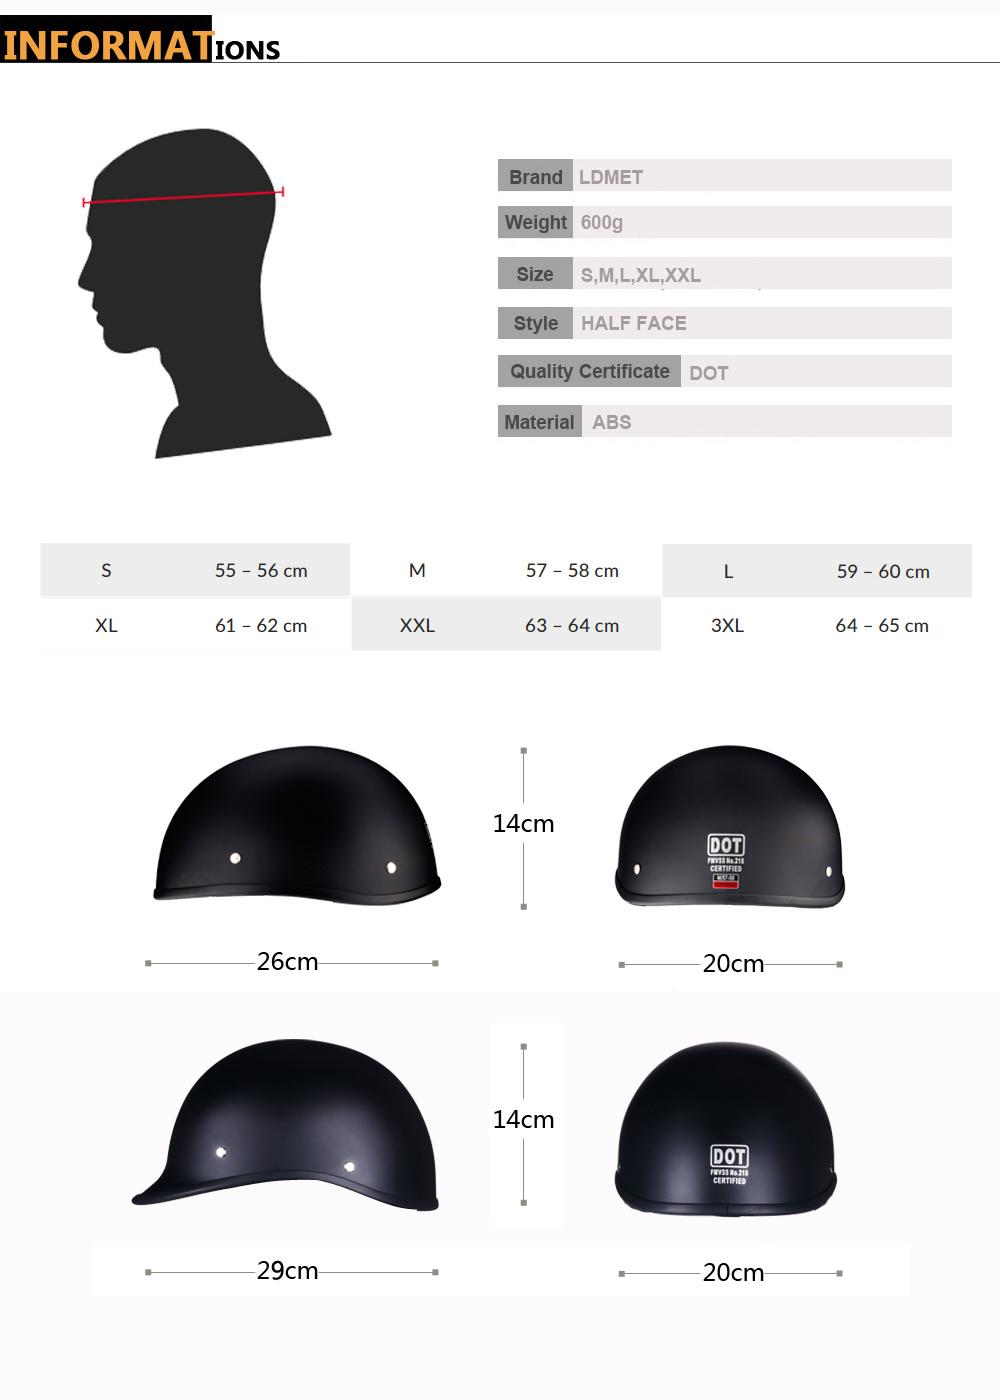 Classic Open Face Helmets Good Quality